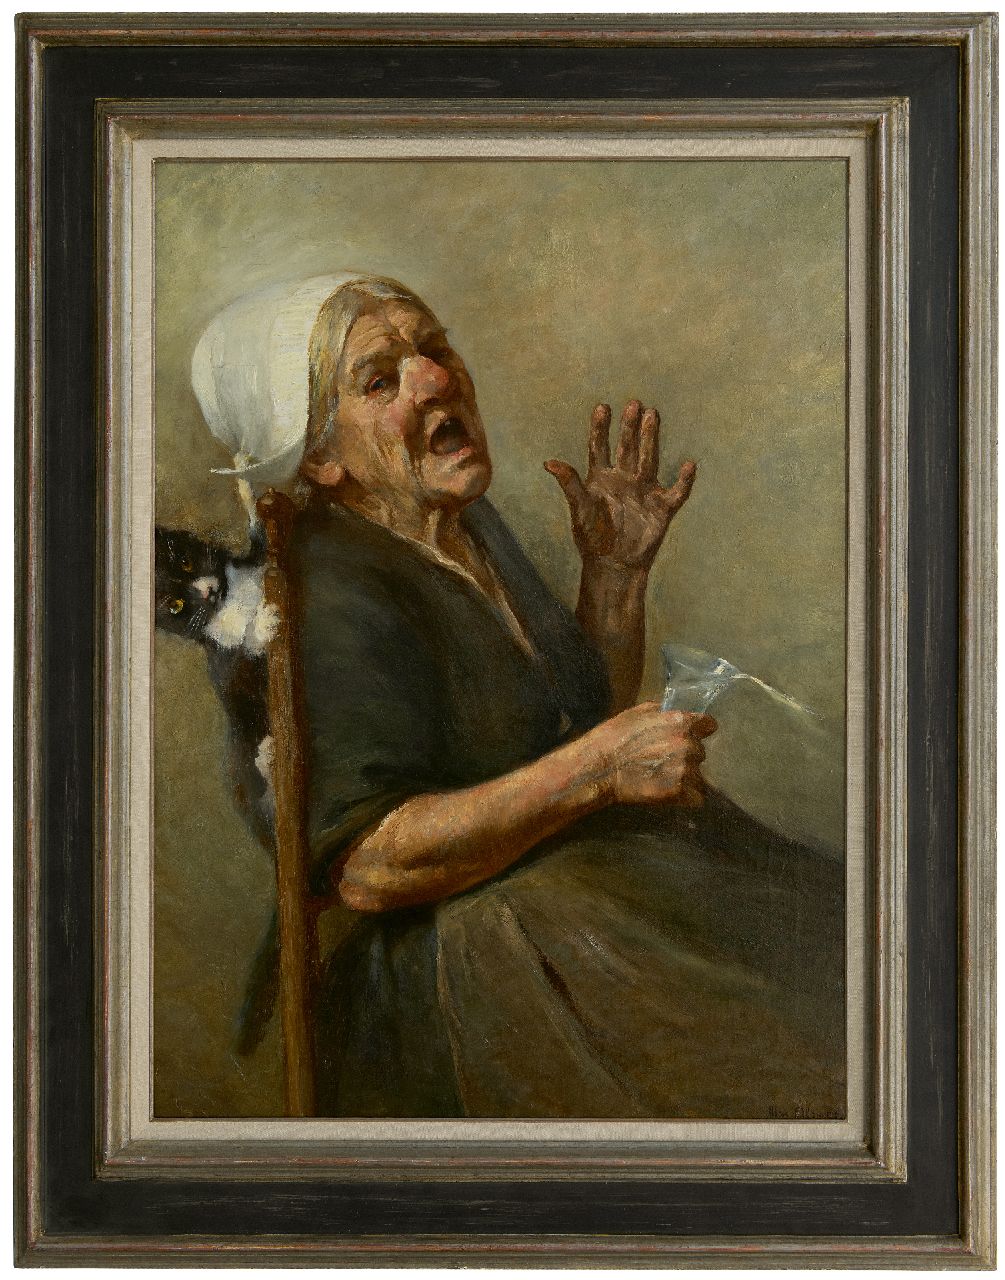 Alandt M.A.  | Max Alexander Alandt | Paintings offered for sale | Ouch! Suprised by the cat, oil on canvas 81.5 x 62.5 cm, signed l.r.